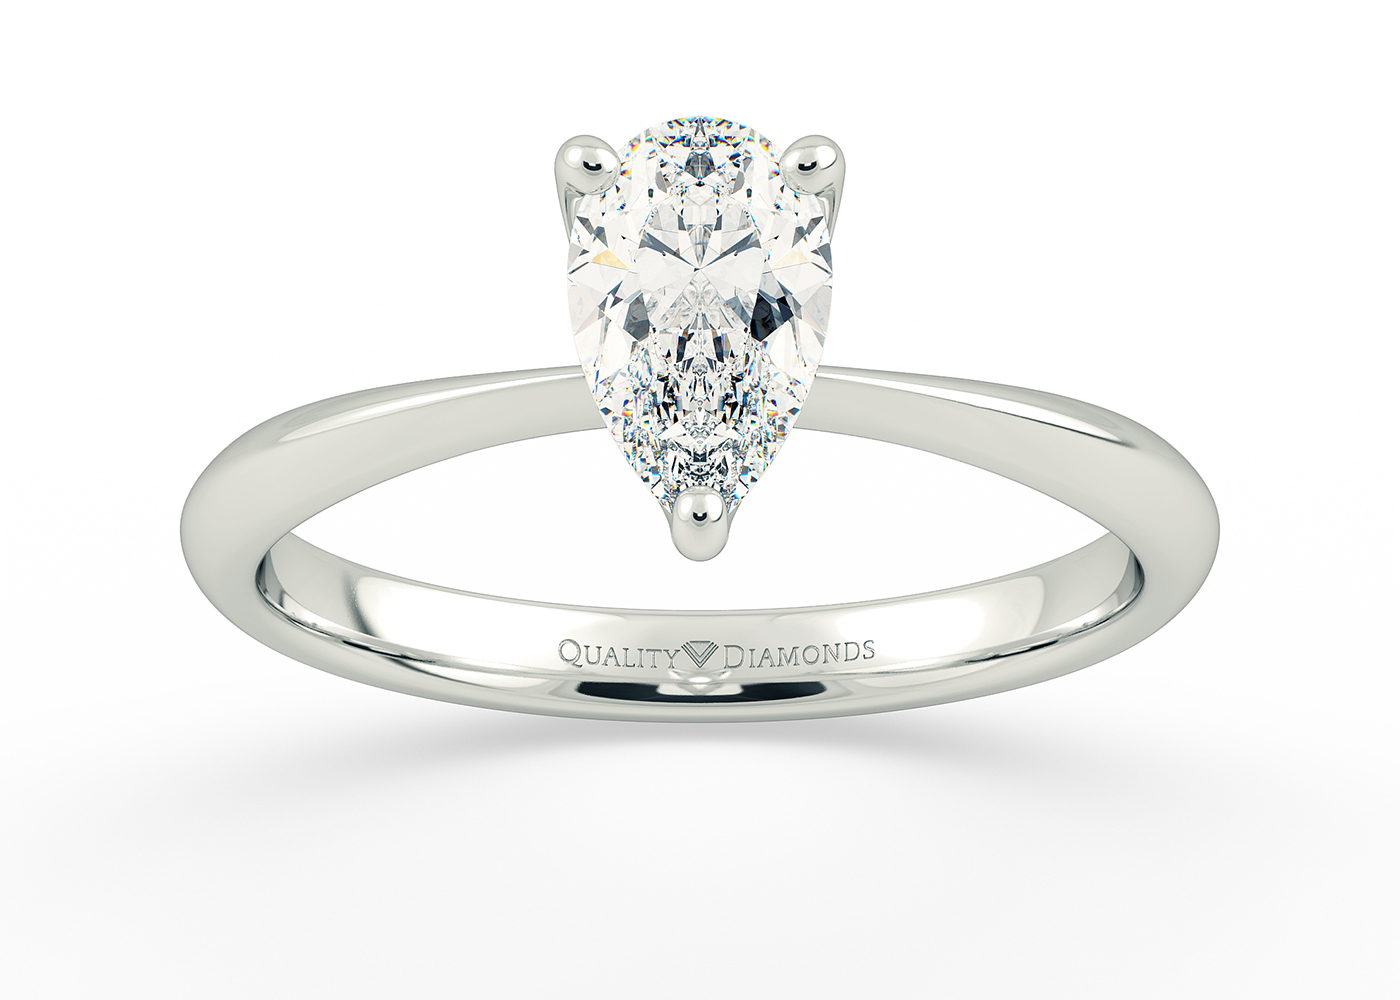 Two Carat Pear Solitaire Diamond Engagement Ring in 18K White Gold